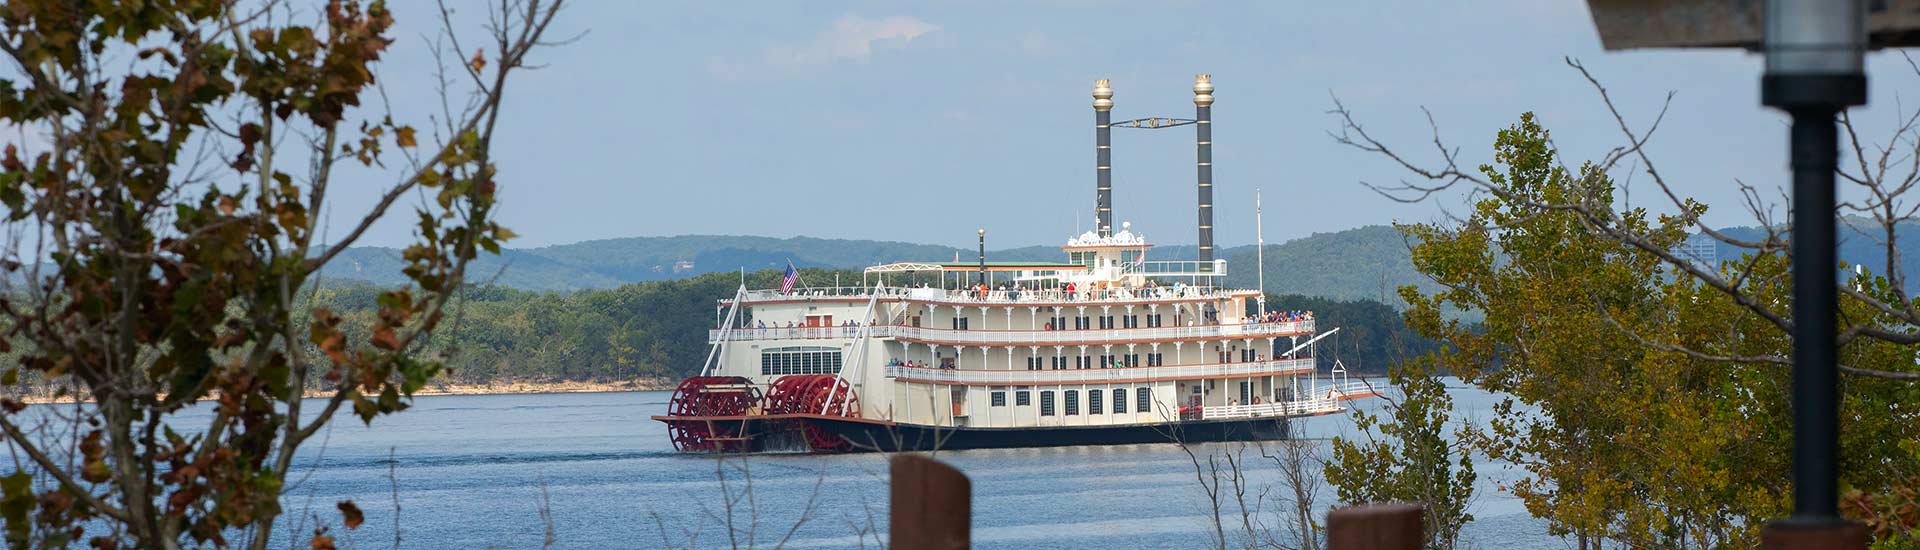 The Showboat Branson Belle framed by trees as it glides across Table Rock Lake with its paddle wheel in motion.